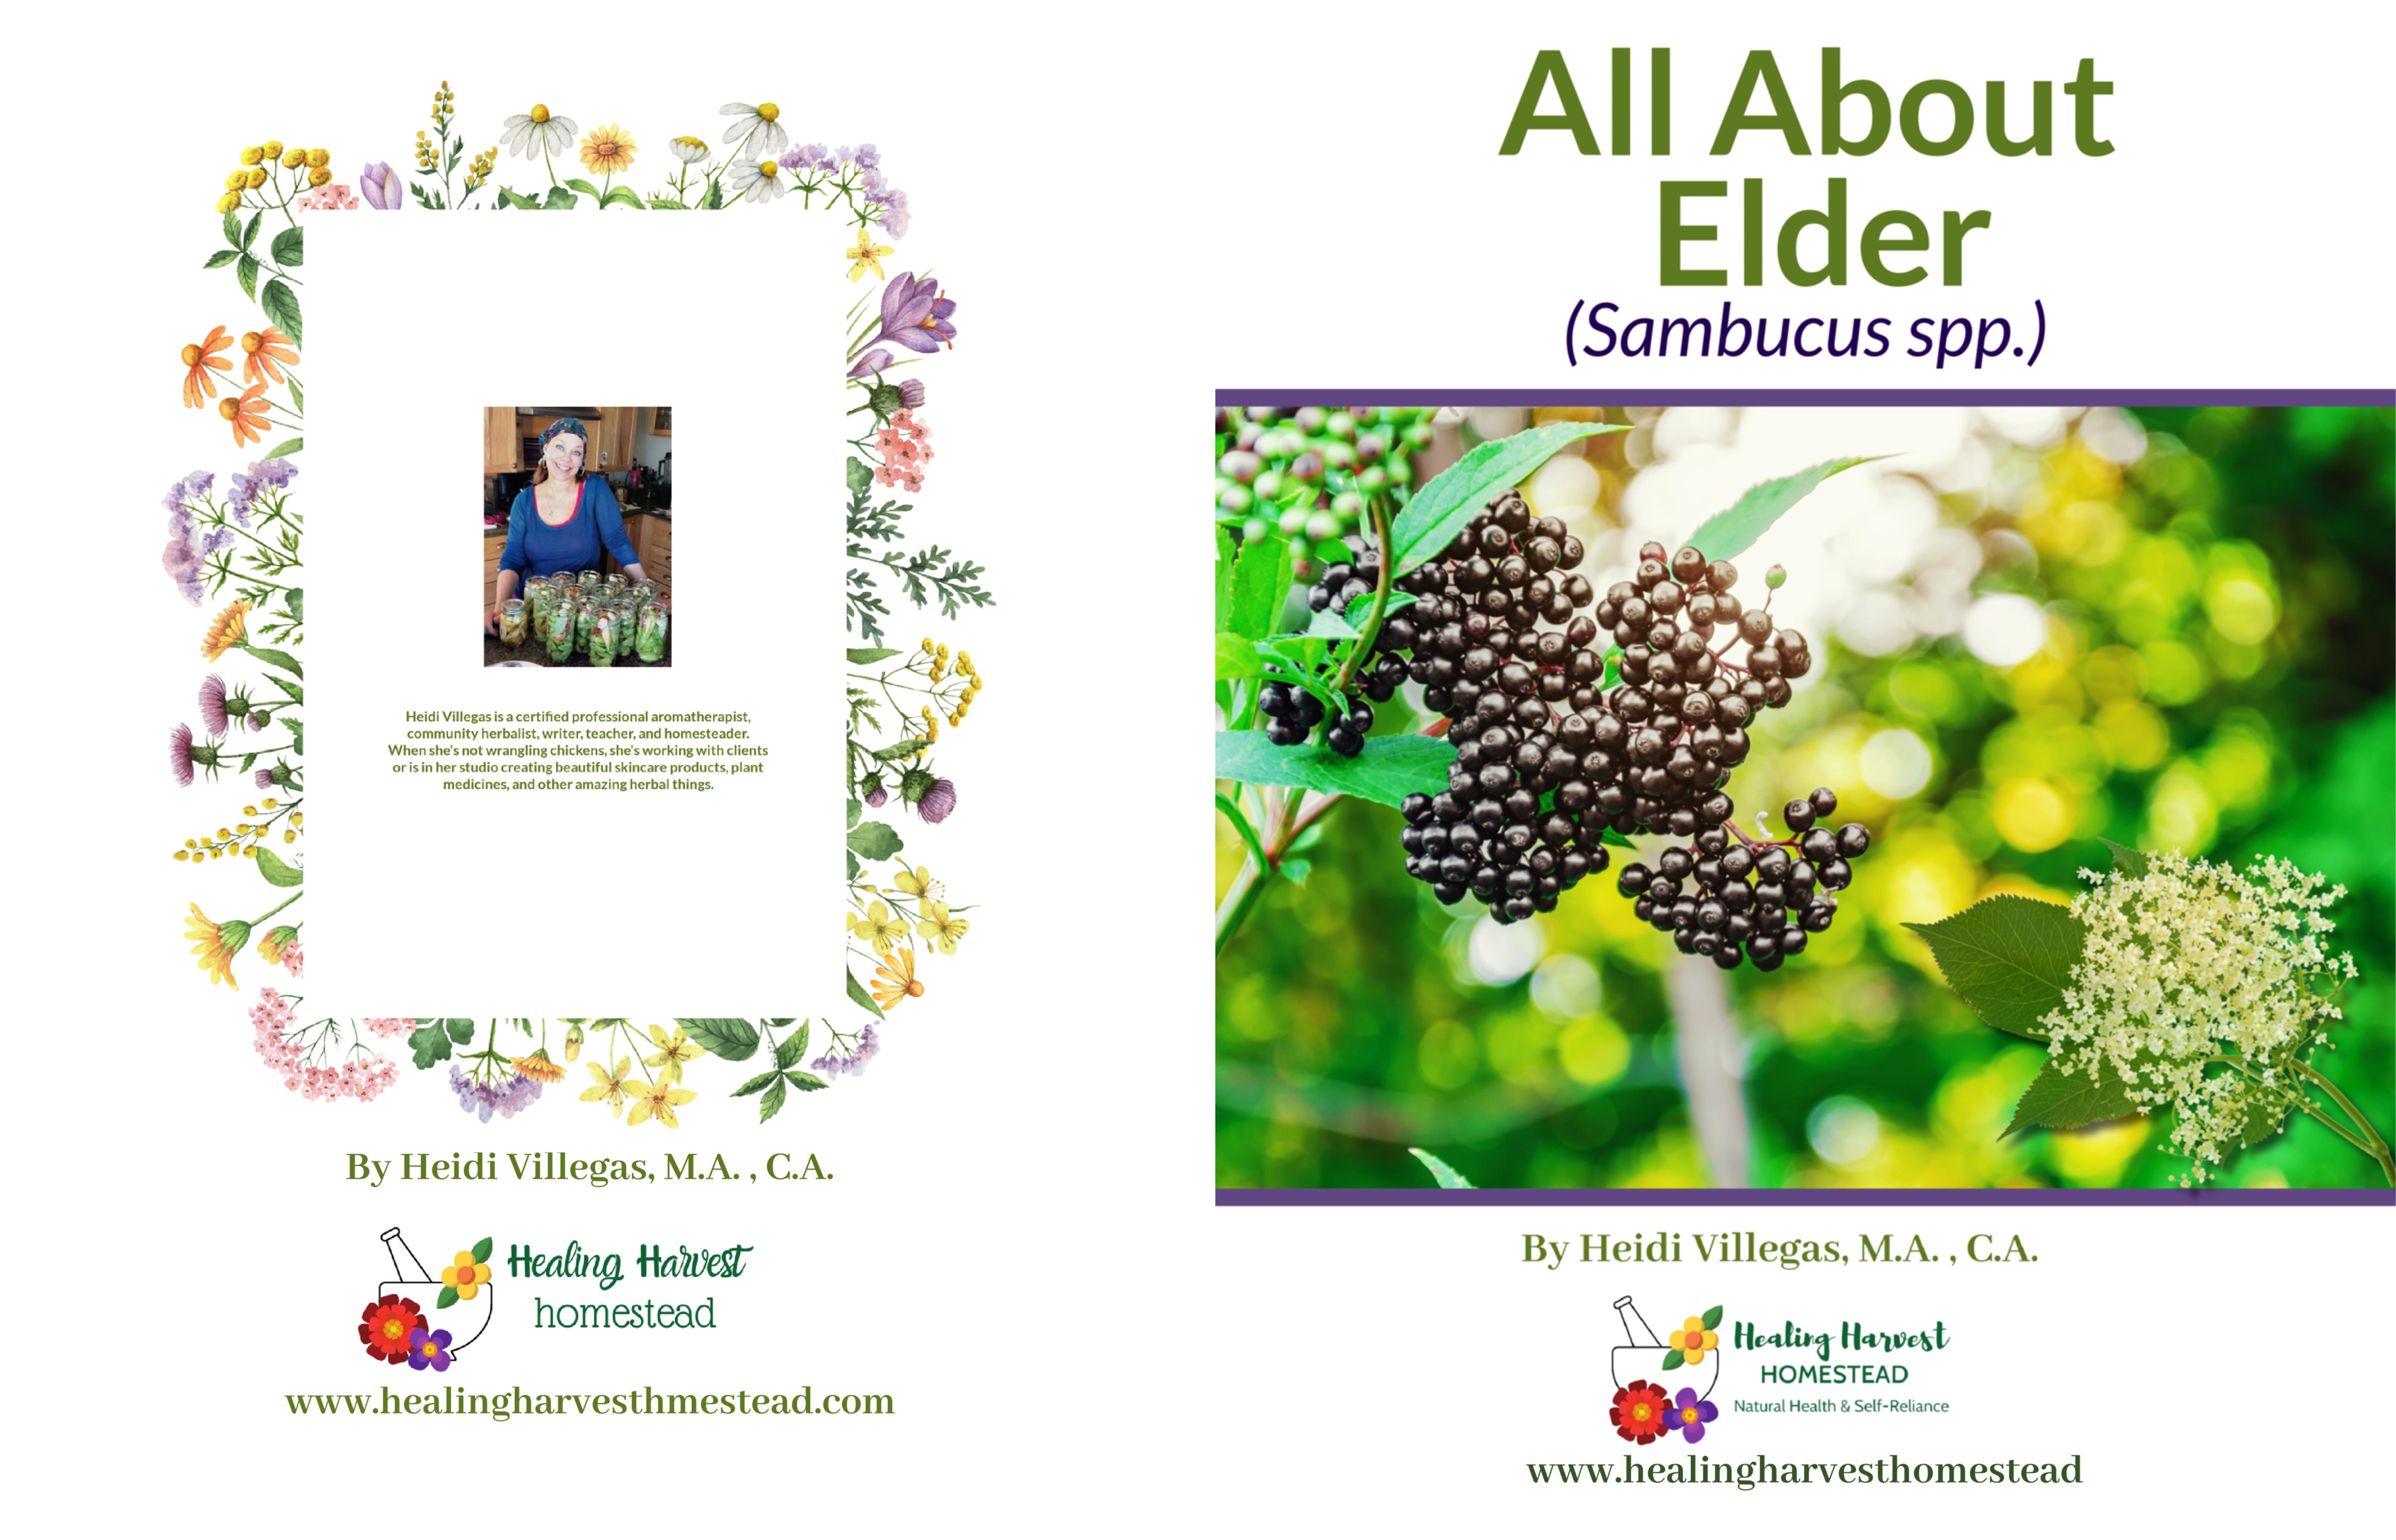 All About Elder cover image